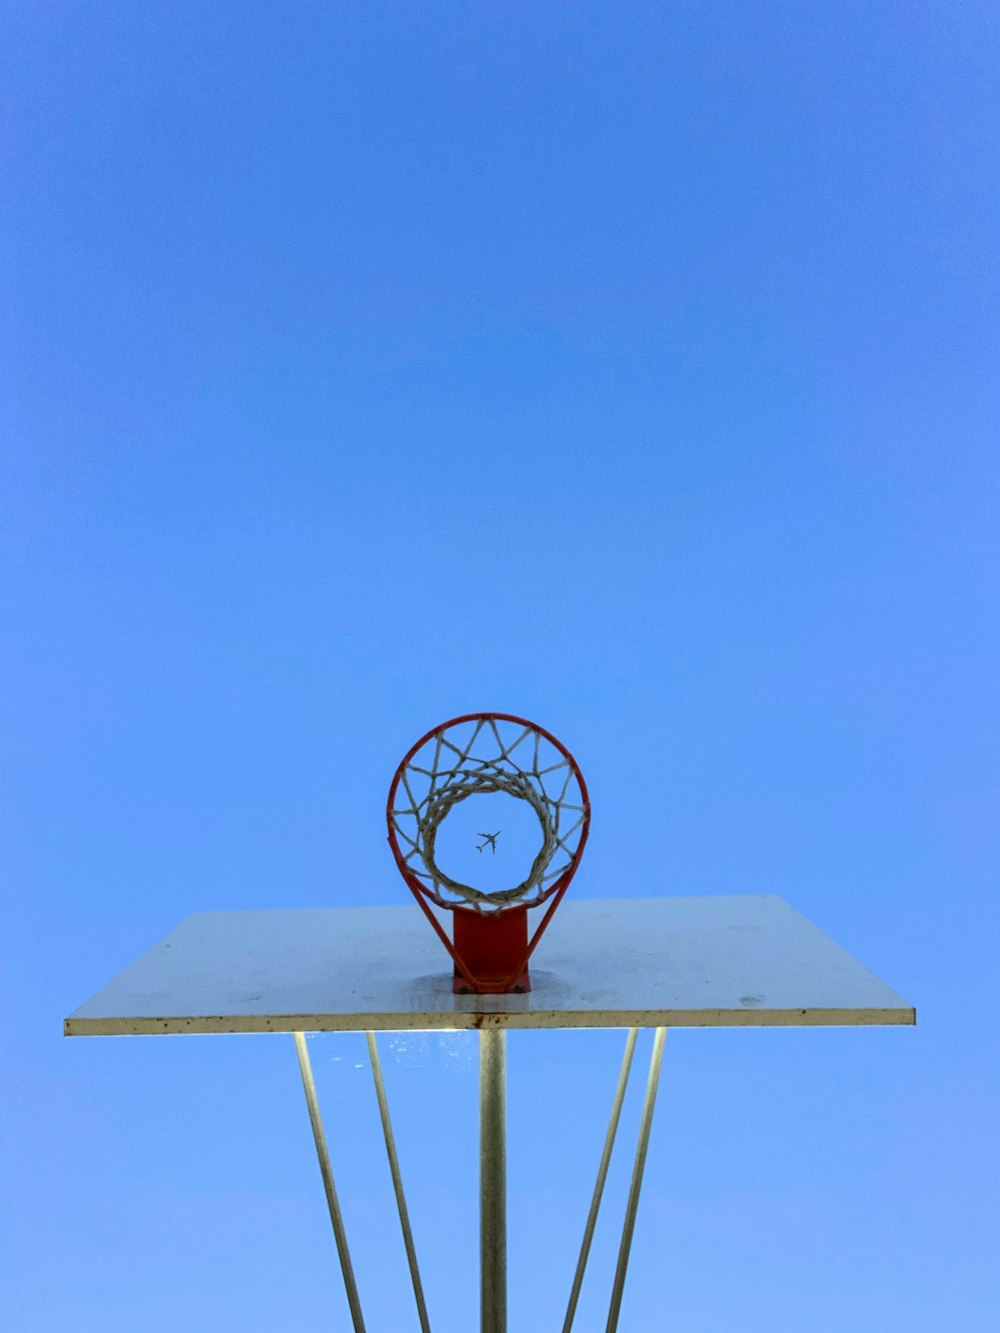 red and white basketball hoop under blue sky